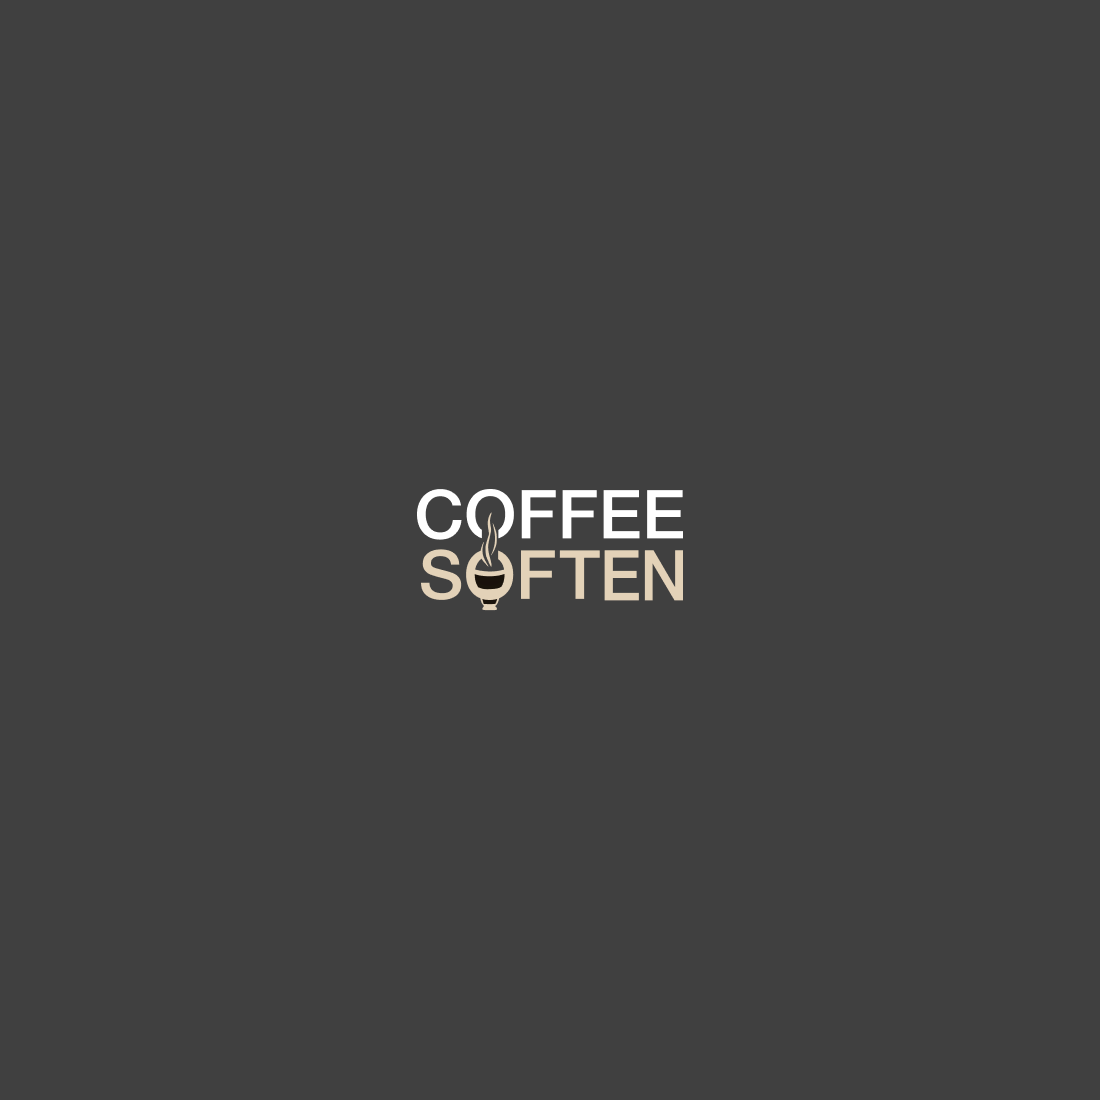 Coffee shop logo design Сoffee Soften preview image.